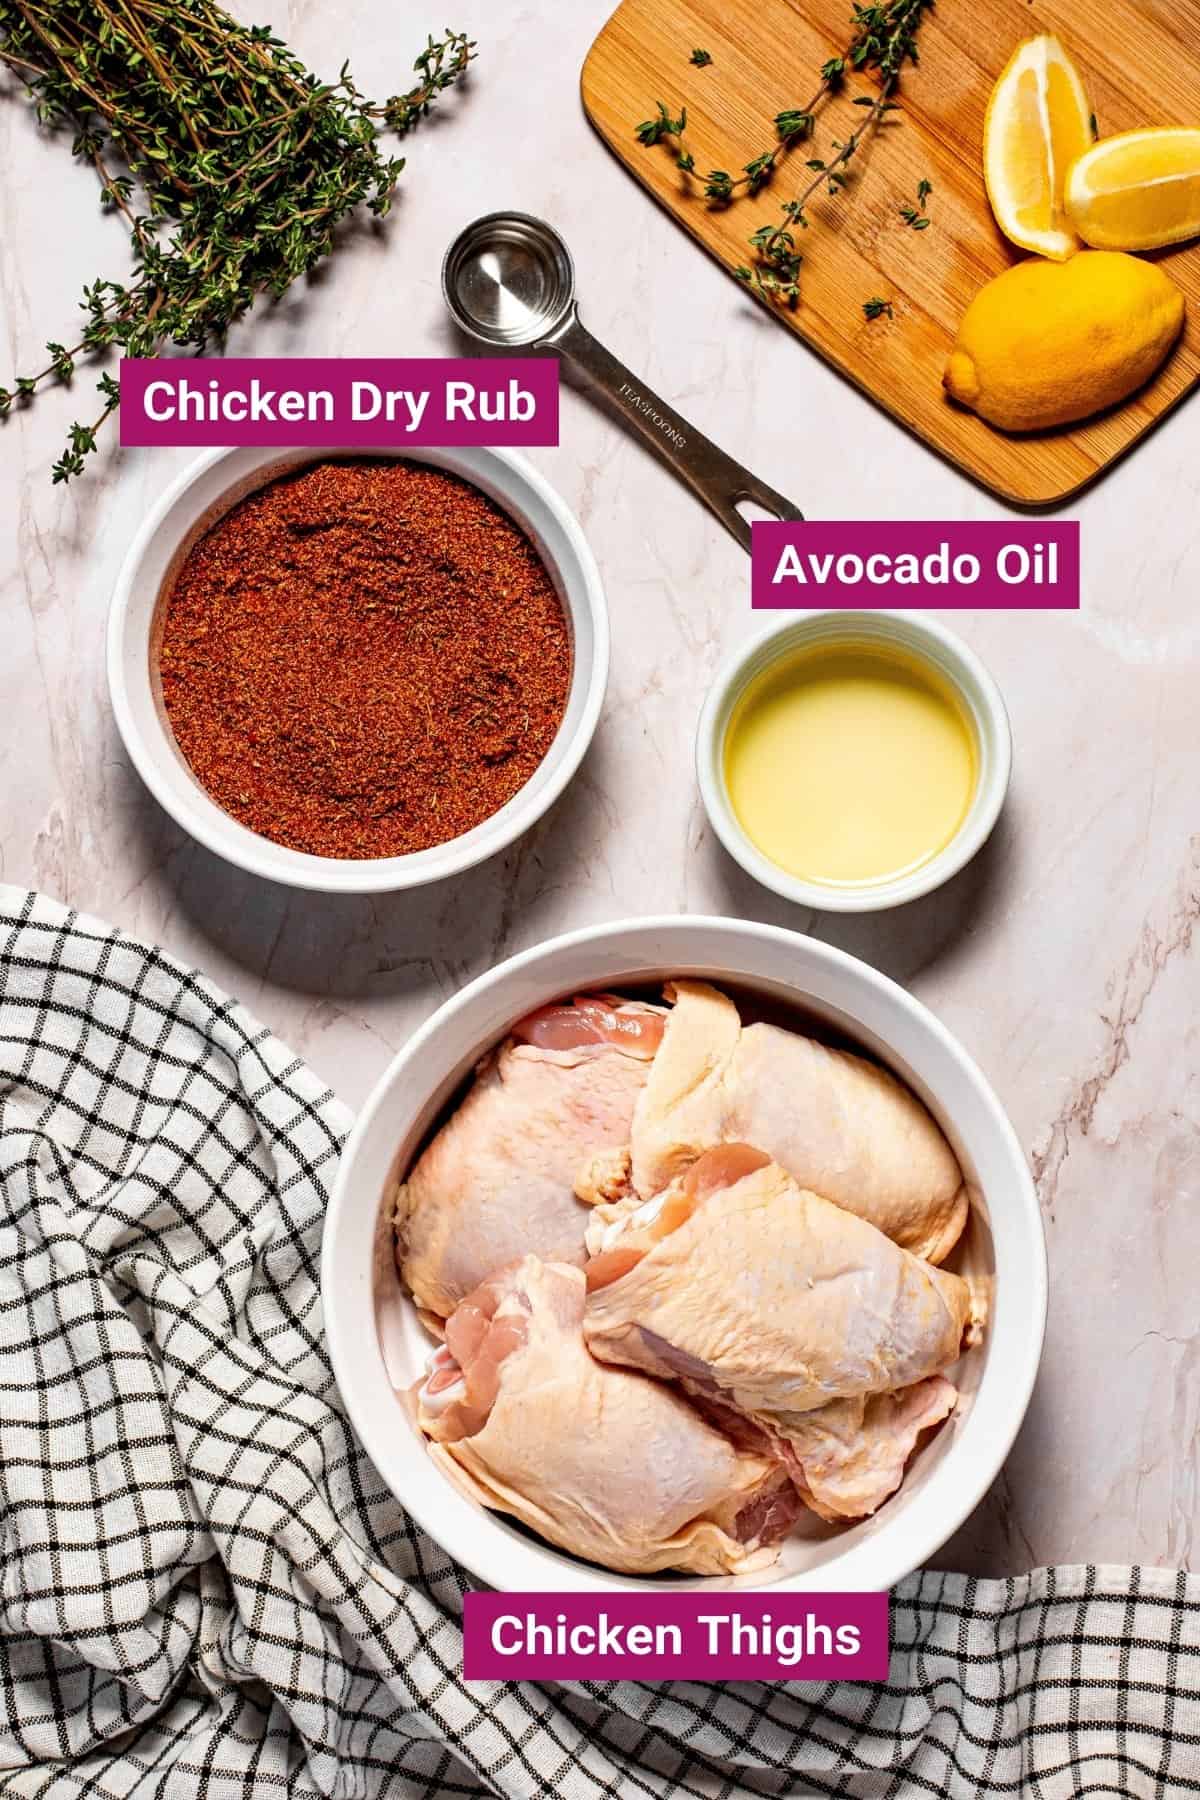 ingredients needed to make air fryer dry rub chicken thighs like chicken dry rub, avocado oil, and chicken thighs